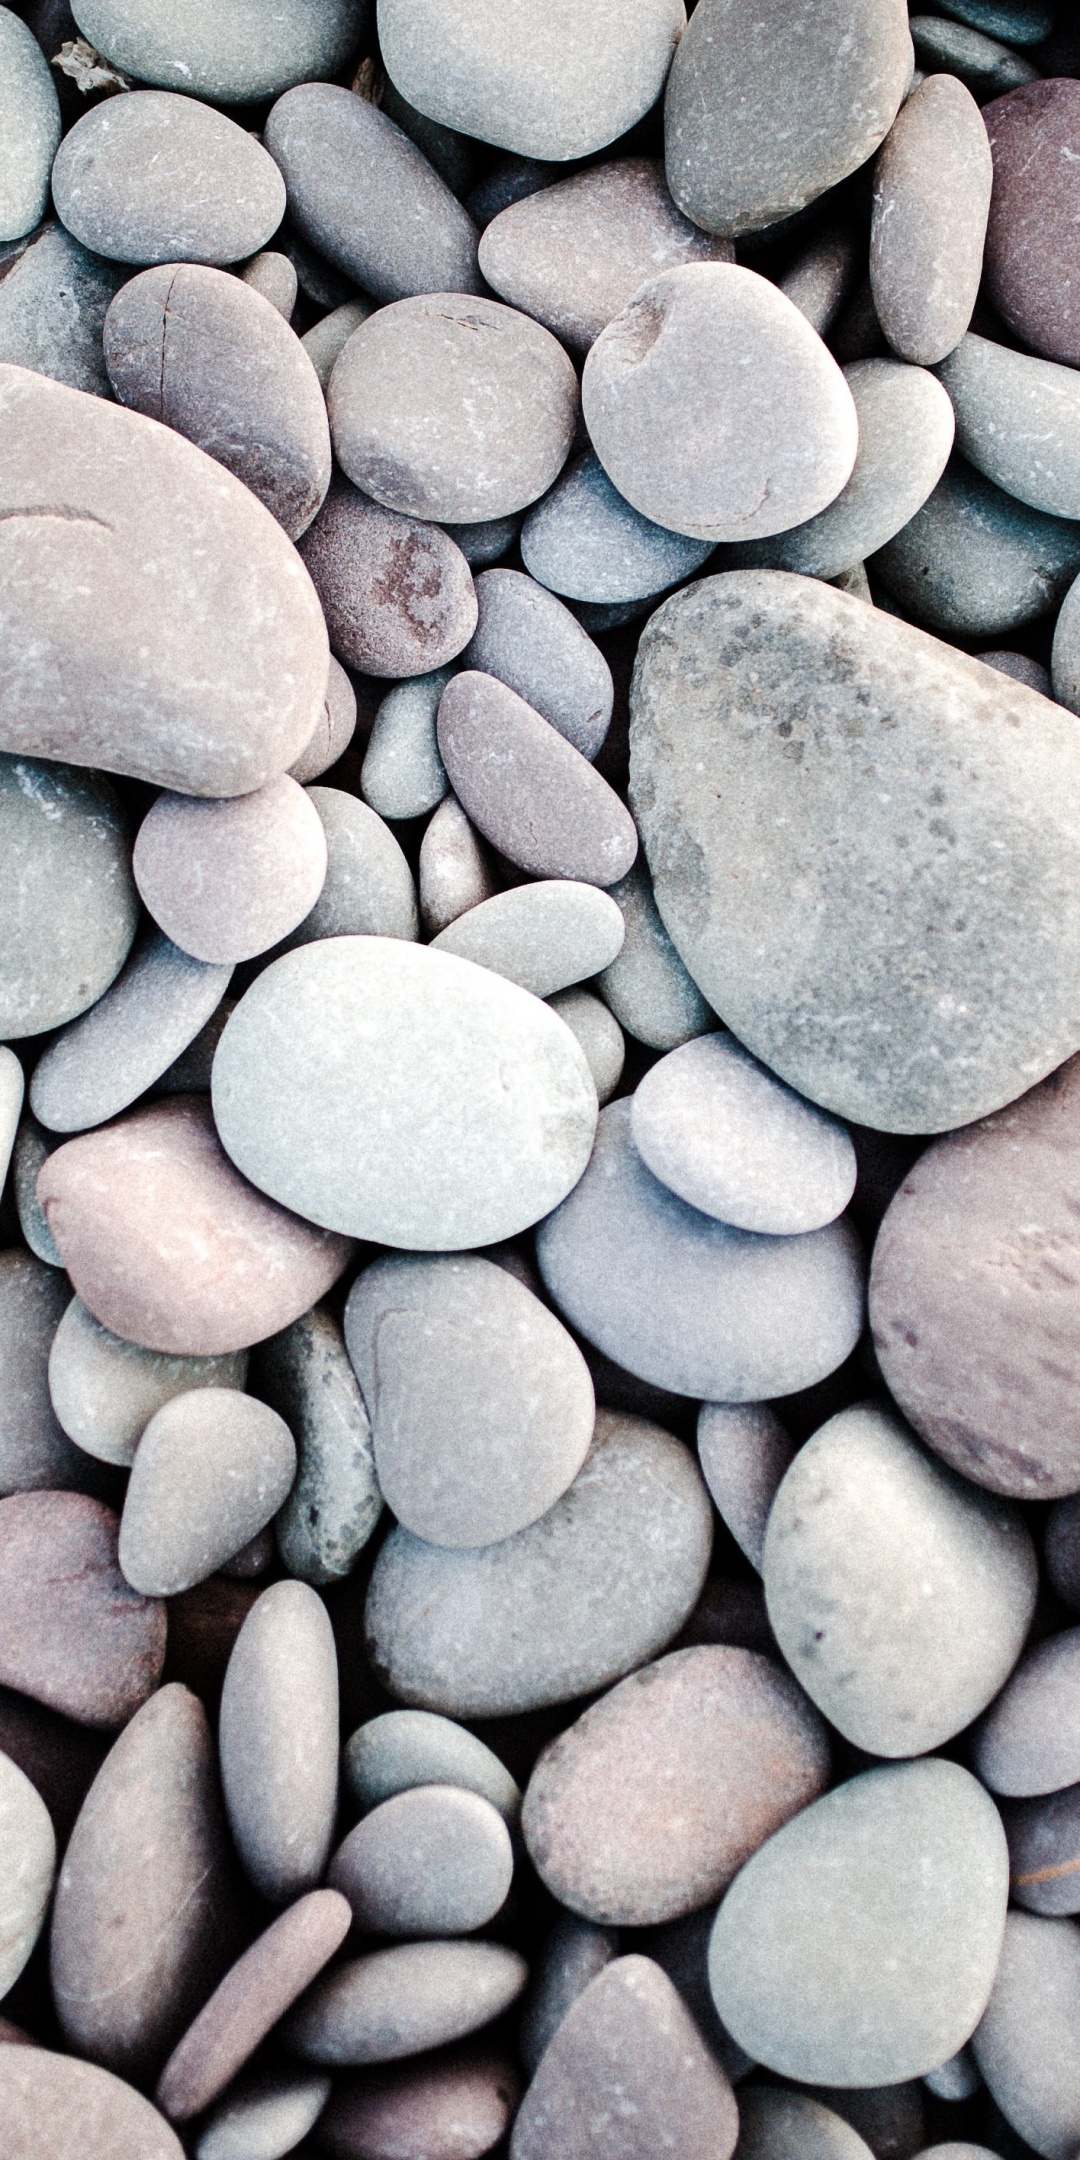 Stone Texture Background. White Pebbles Wallpaper Stock Photo, Picture And  Royalty Free Image. Image 82744670.